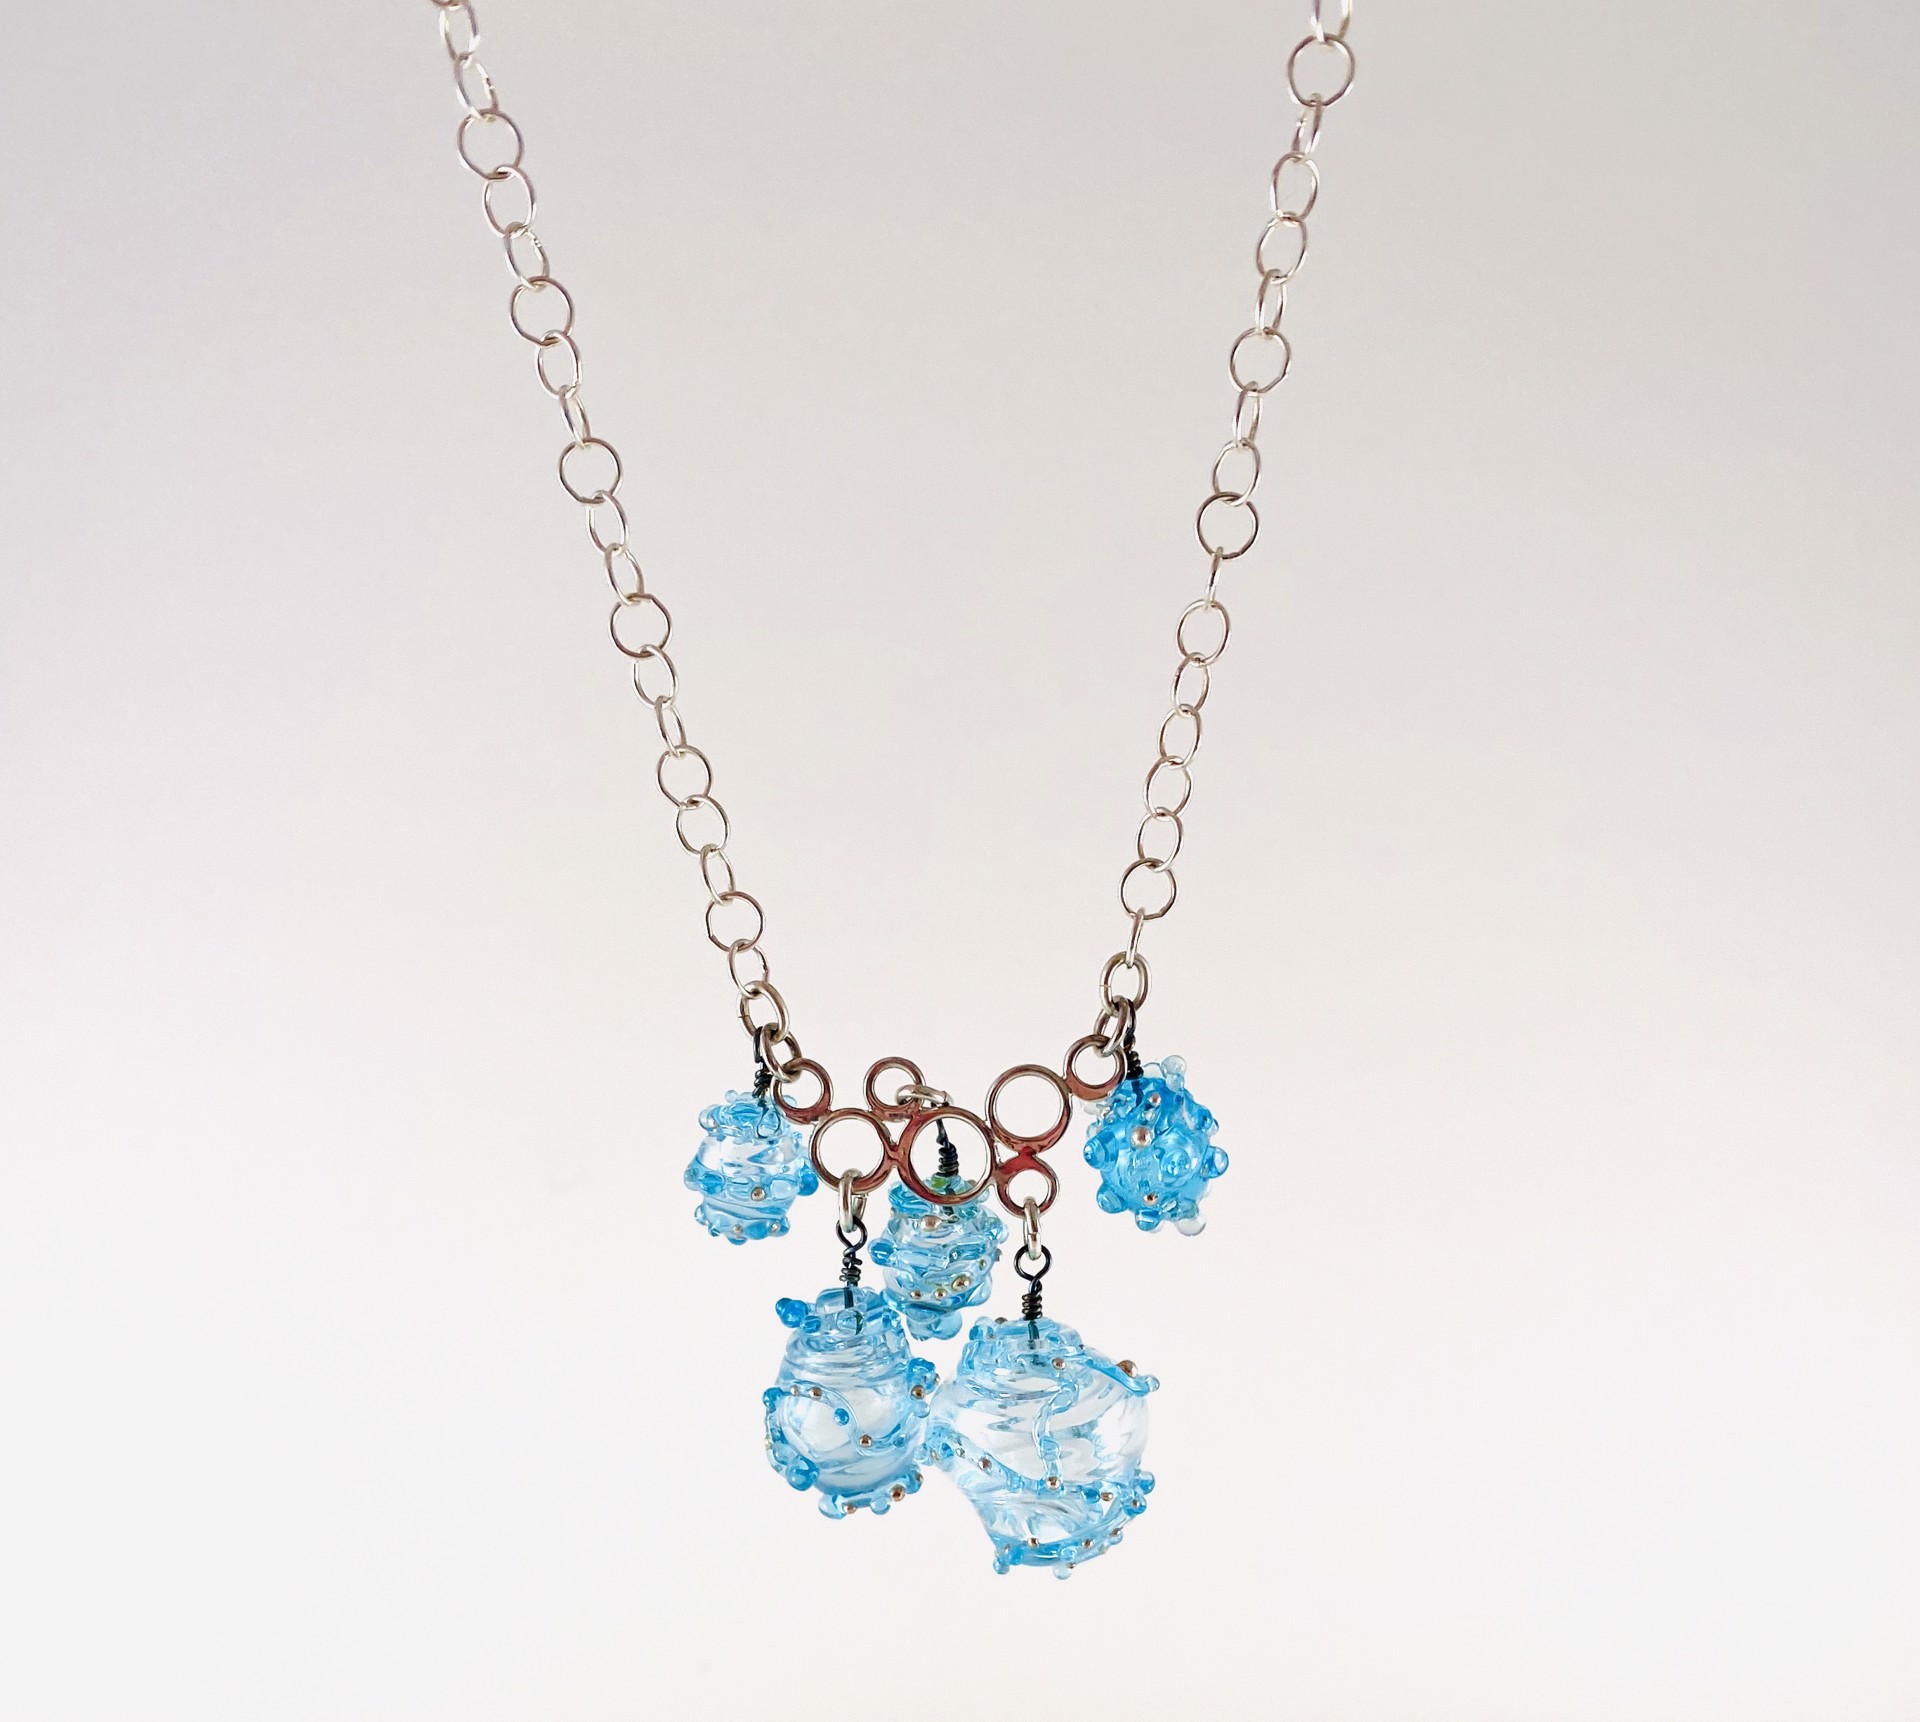 #395 Clear Blue Bubble Bead and Fine Silver Pendant on Silver Chain Necklace by Linda Sacra